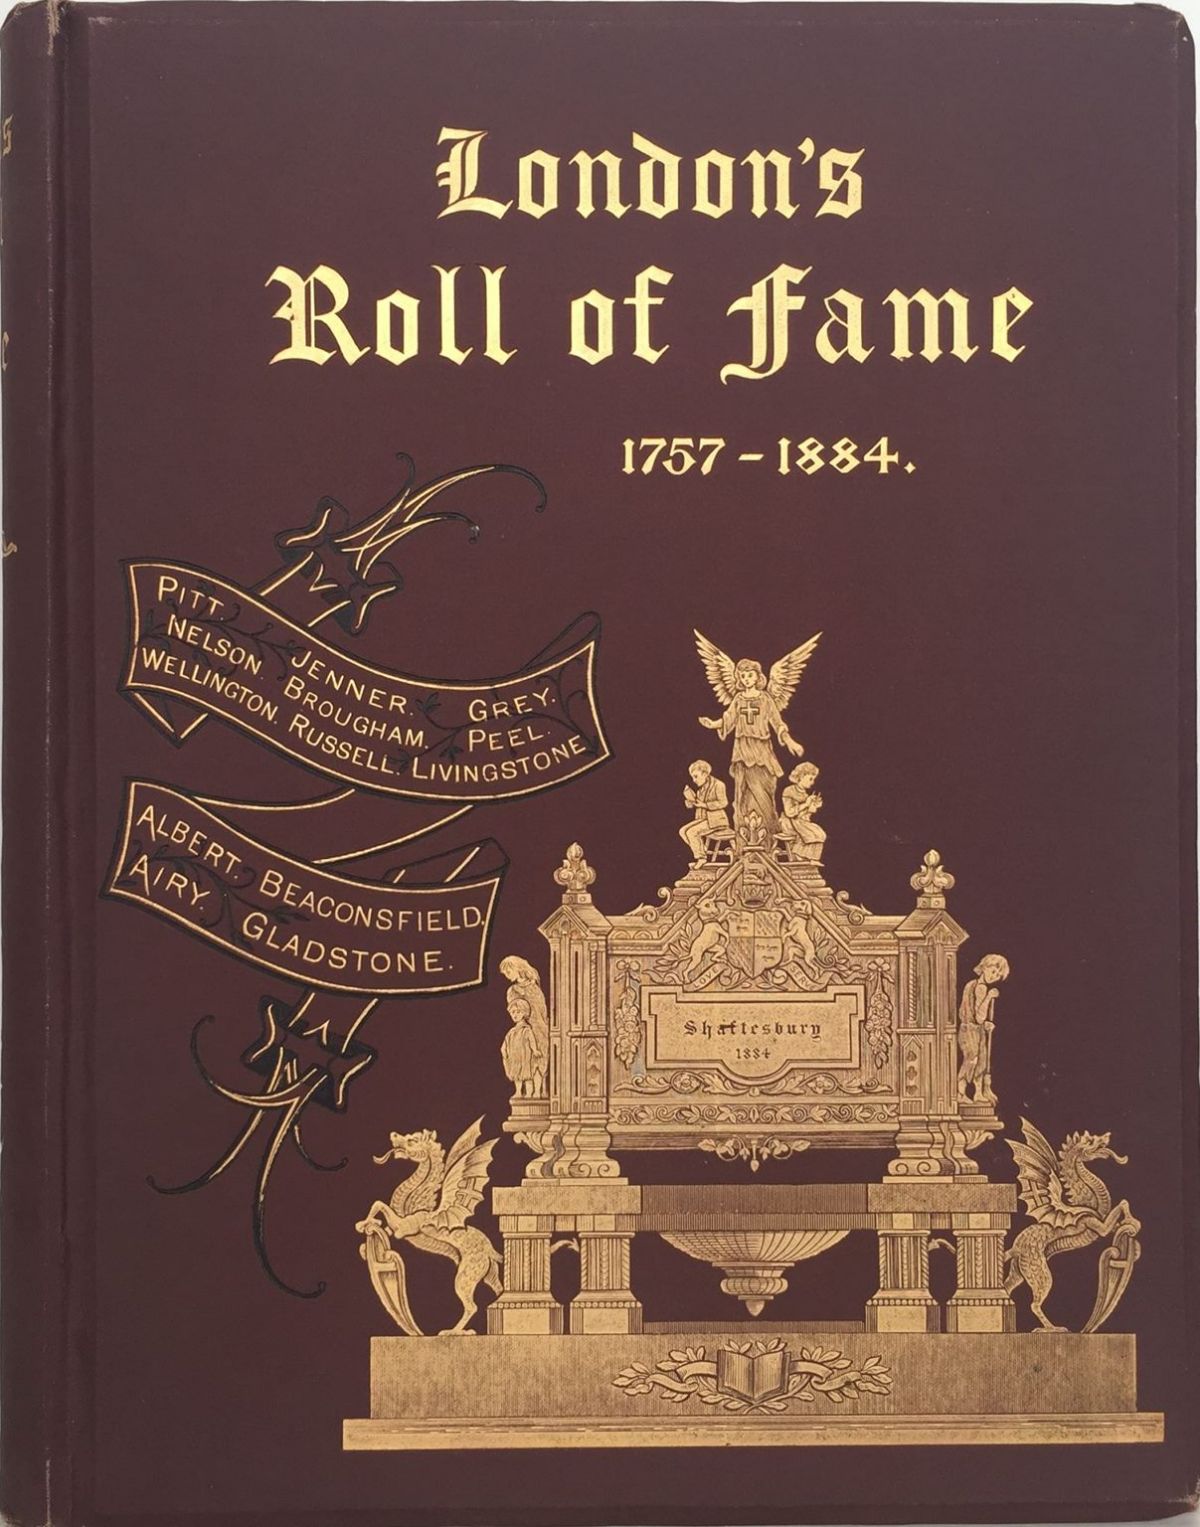 London's Roll of Fame 1757-1884